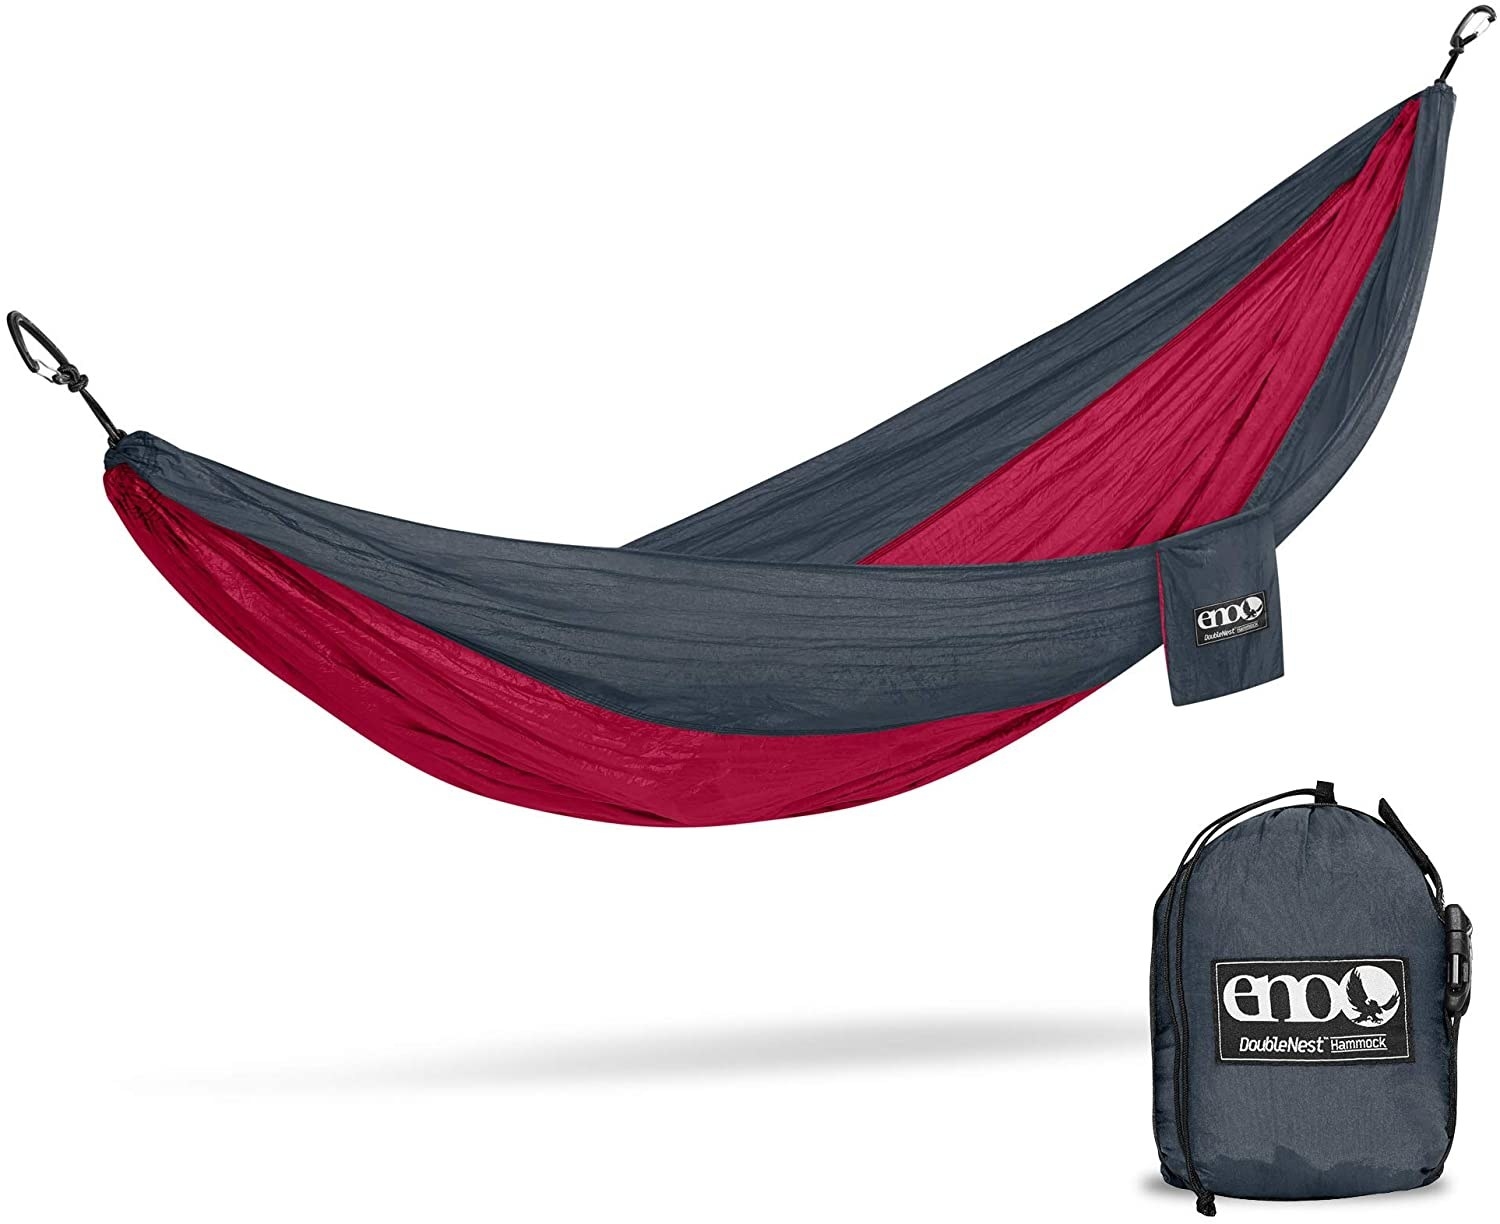 The hammock and carrying pouch